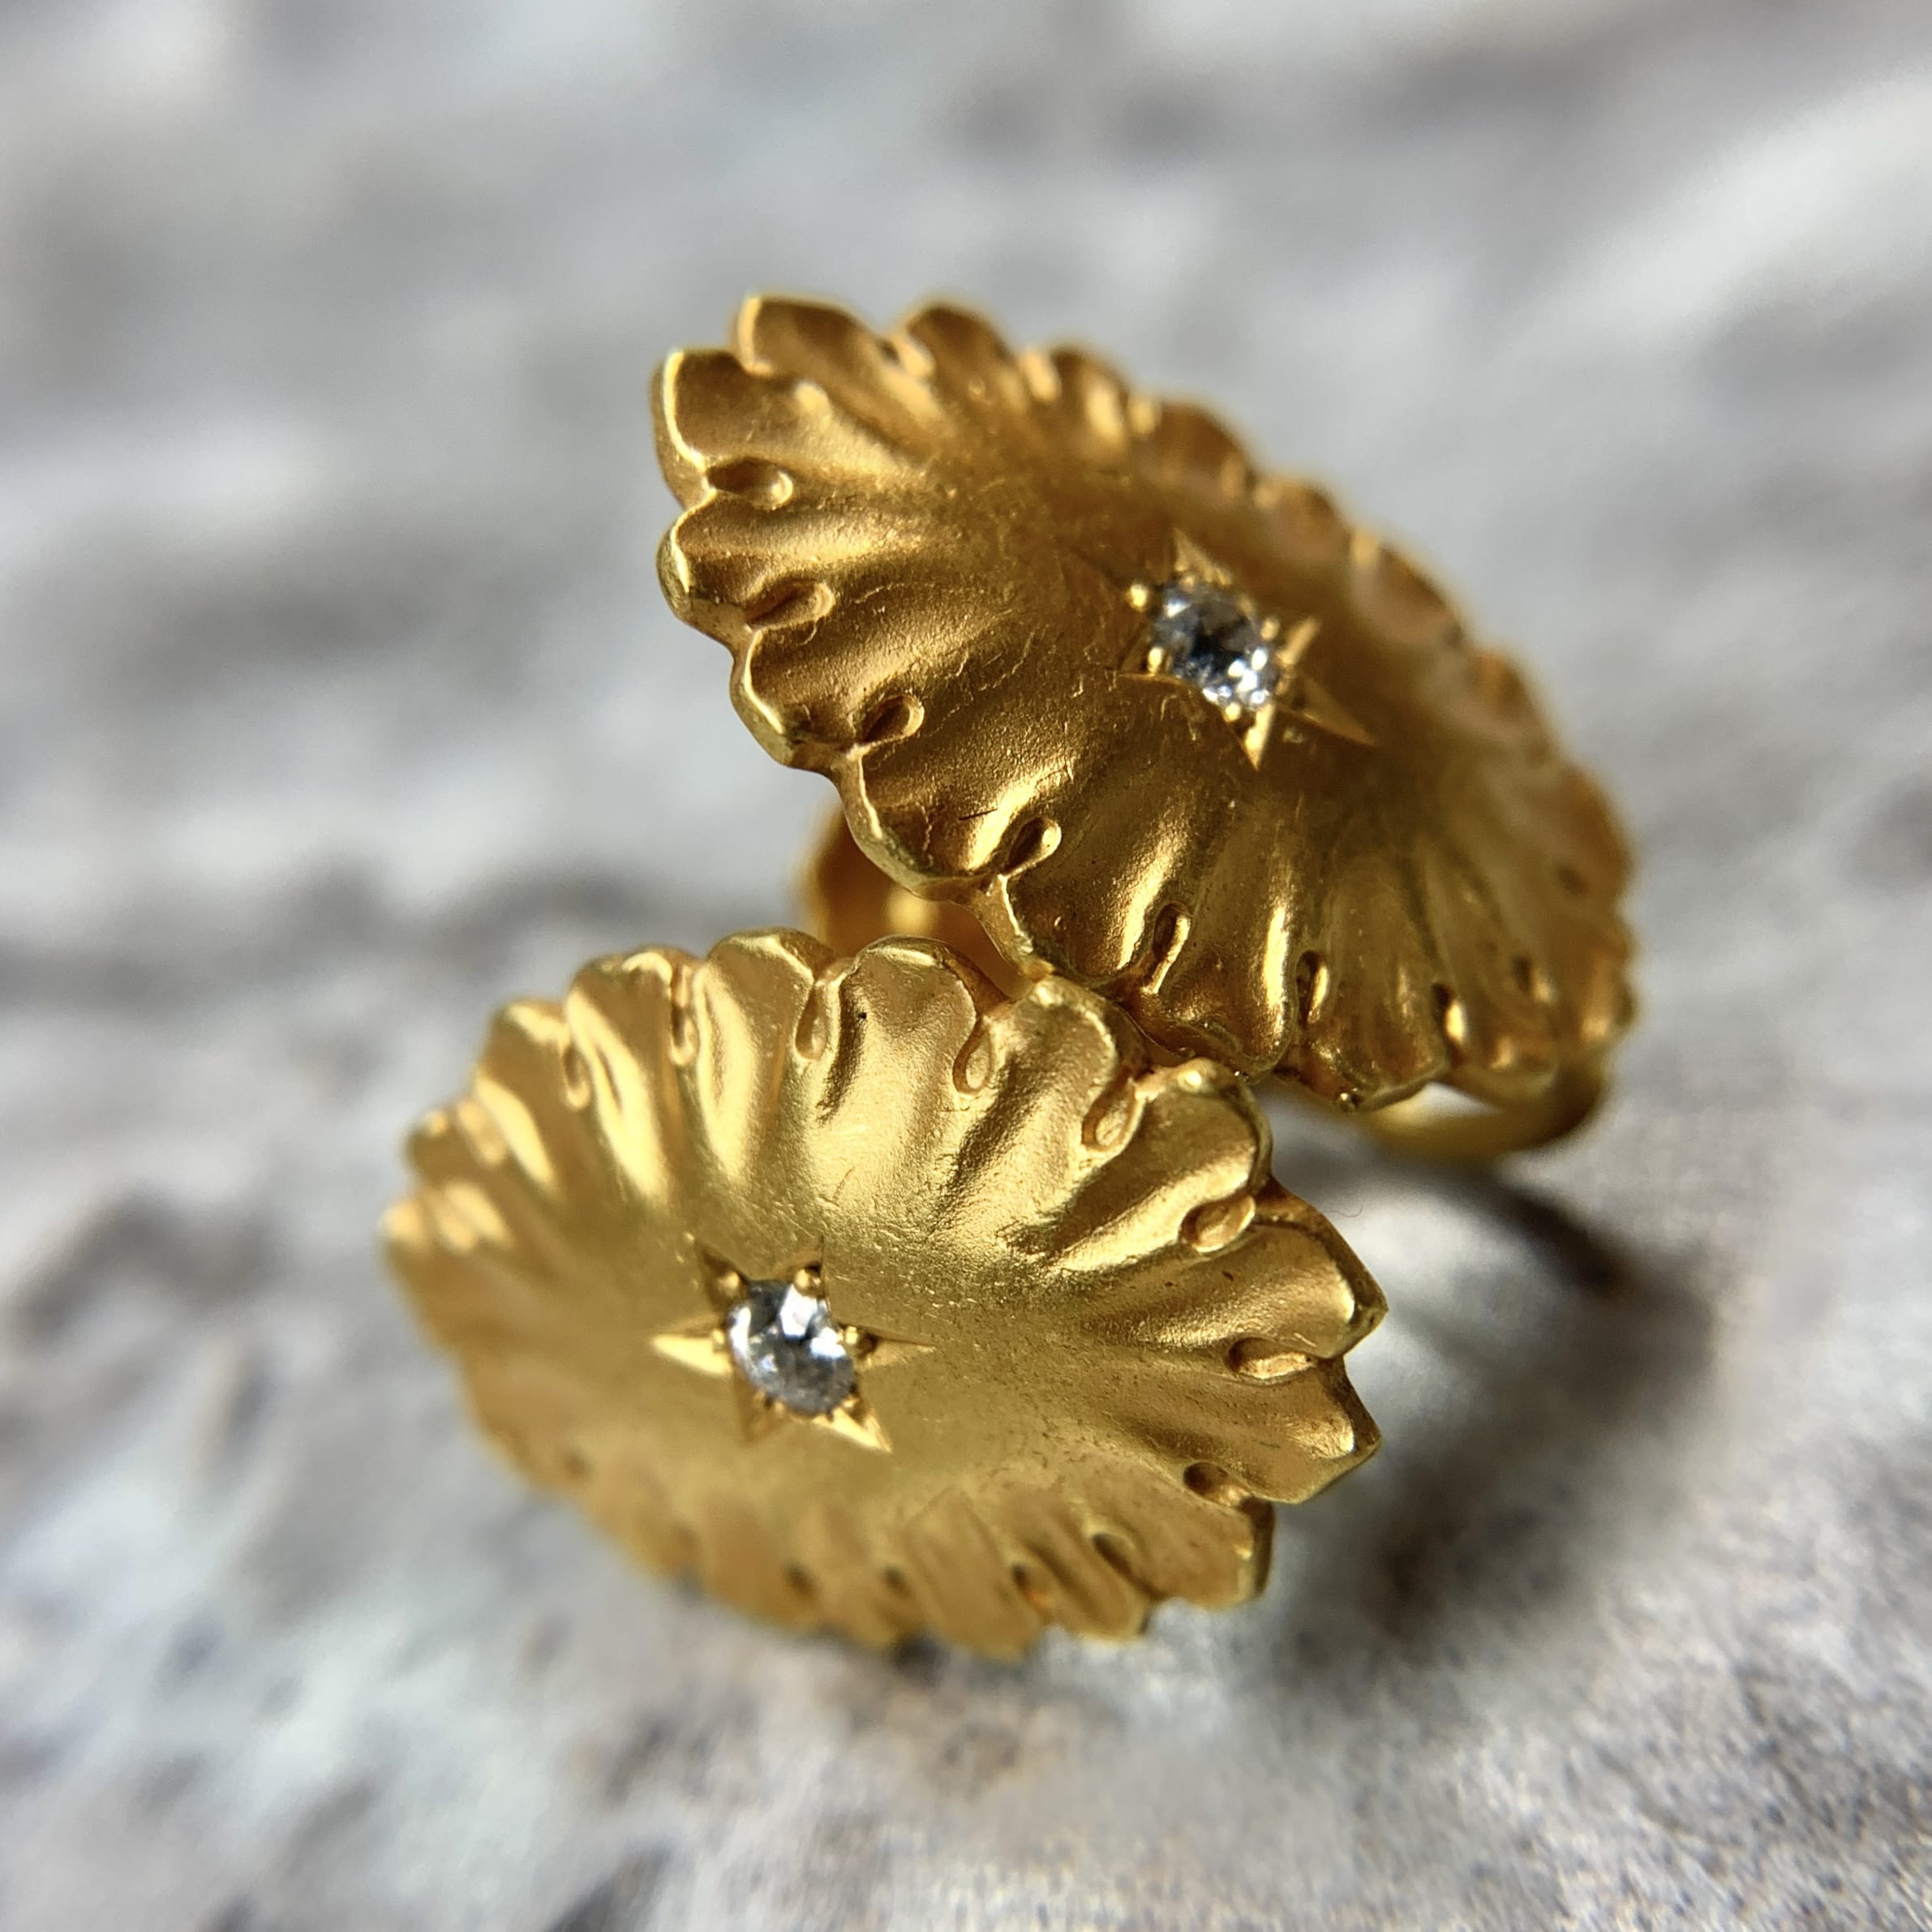 Solid Gold Vintage Screw on Diamond Earrings (A2570) - Summit Jewelers |  7821 Big Bend Blvd. | Webster Groves, MO | 63119